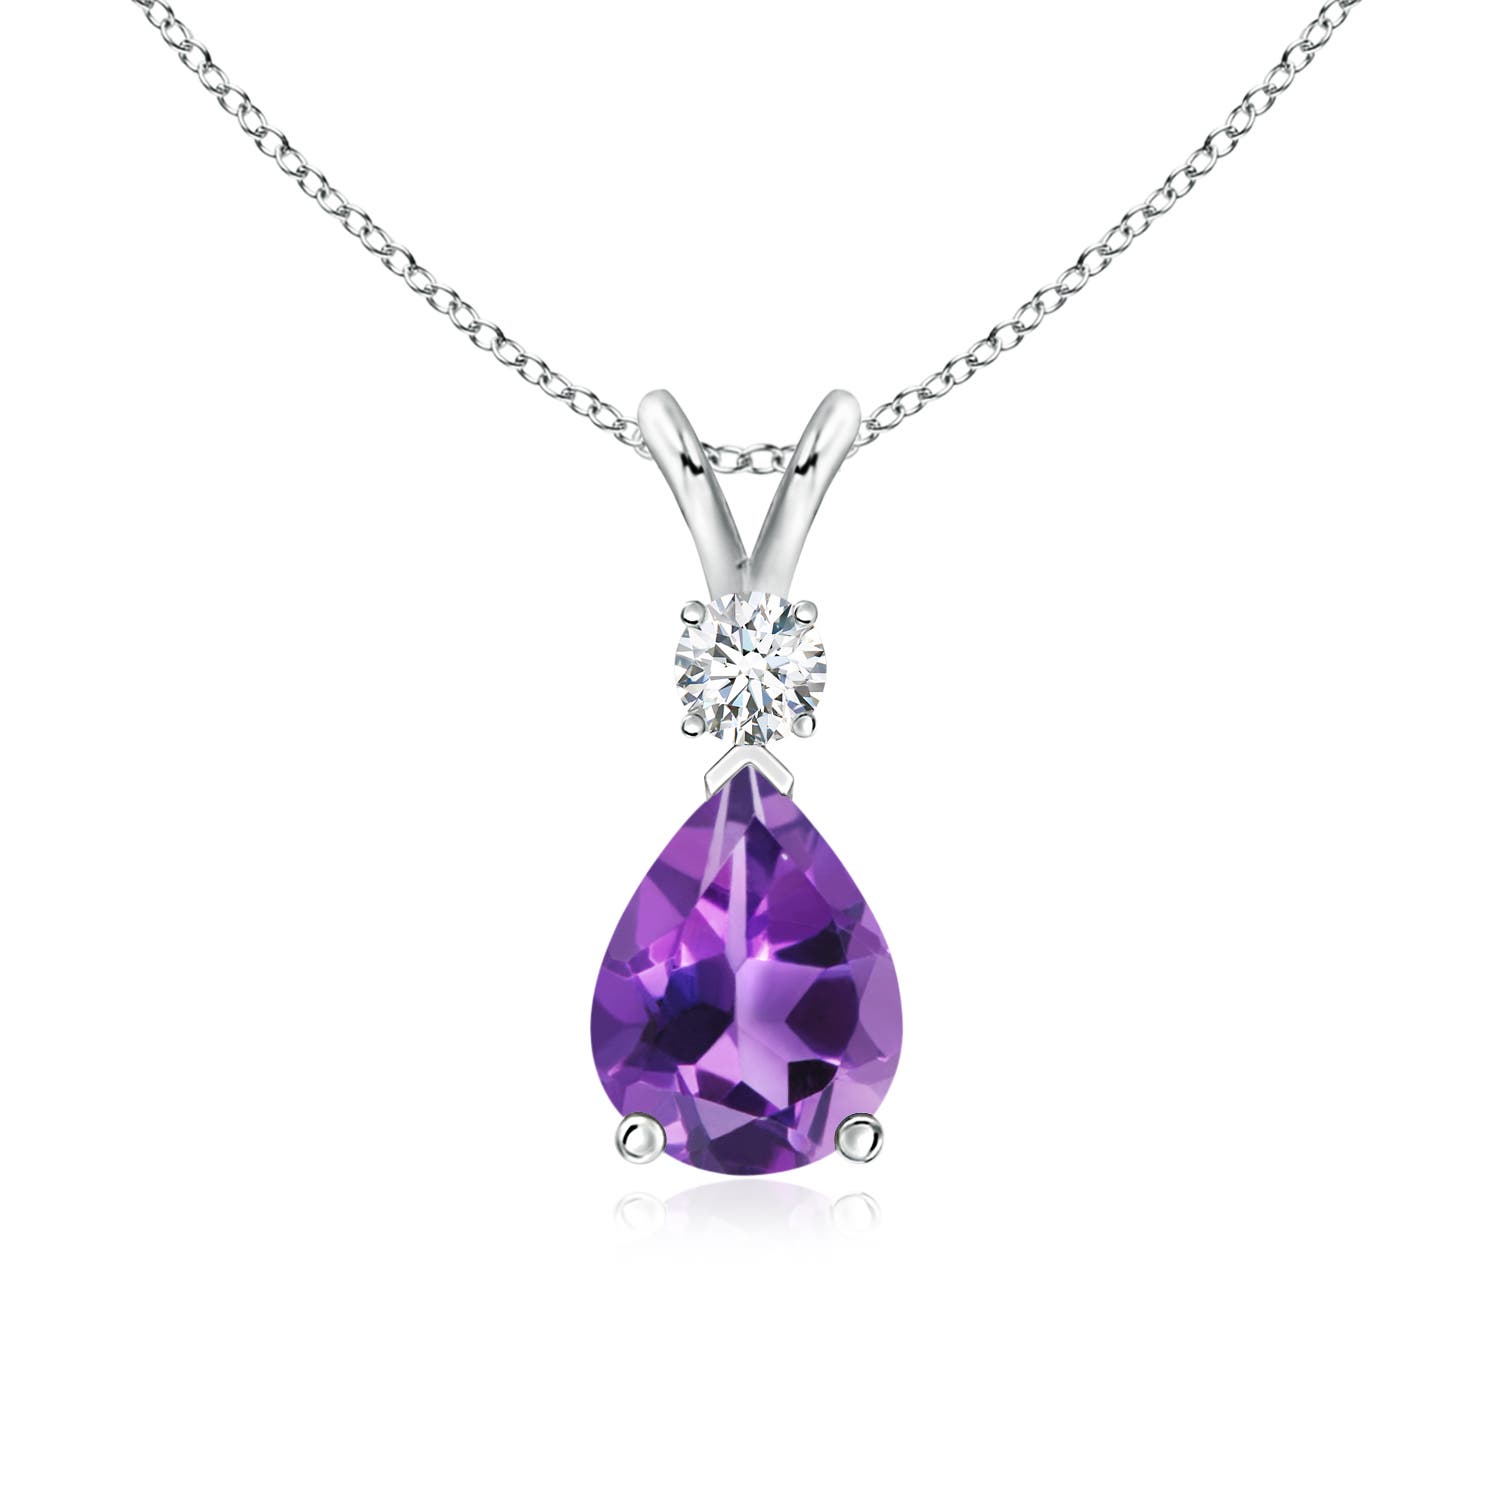 AAA - Amethyst / 1.11 CT / 14 KT White Gold